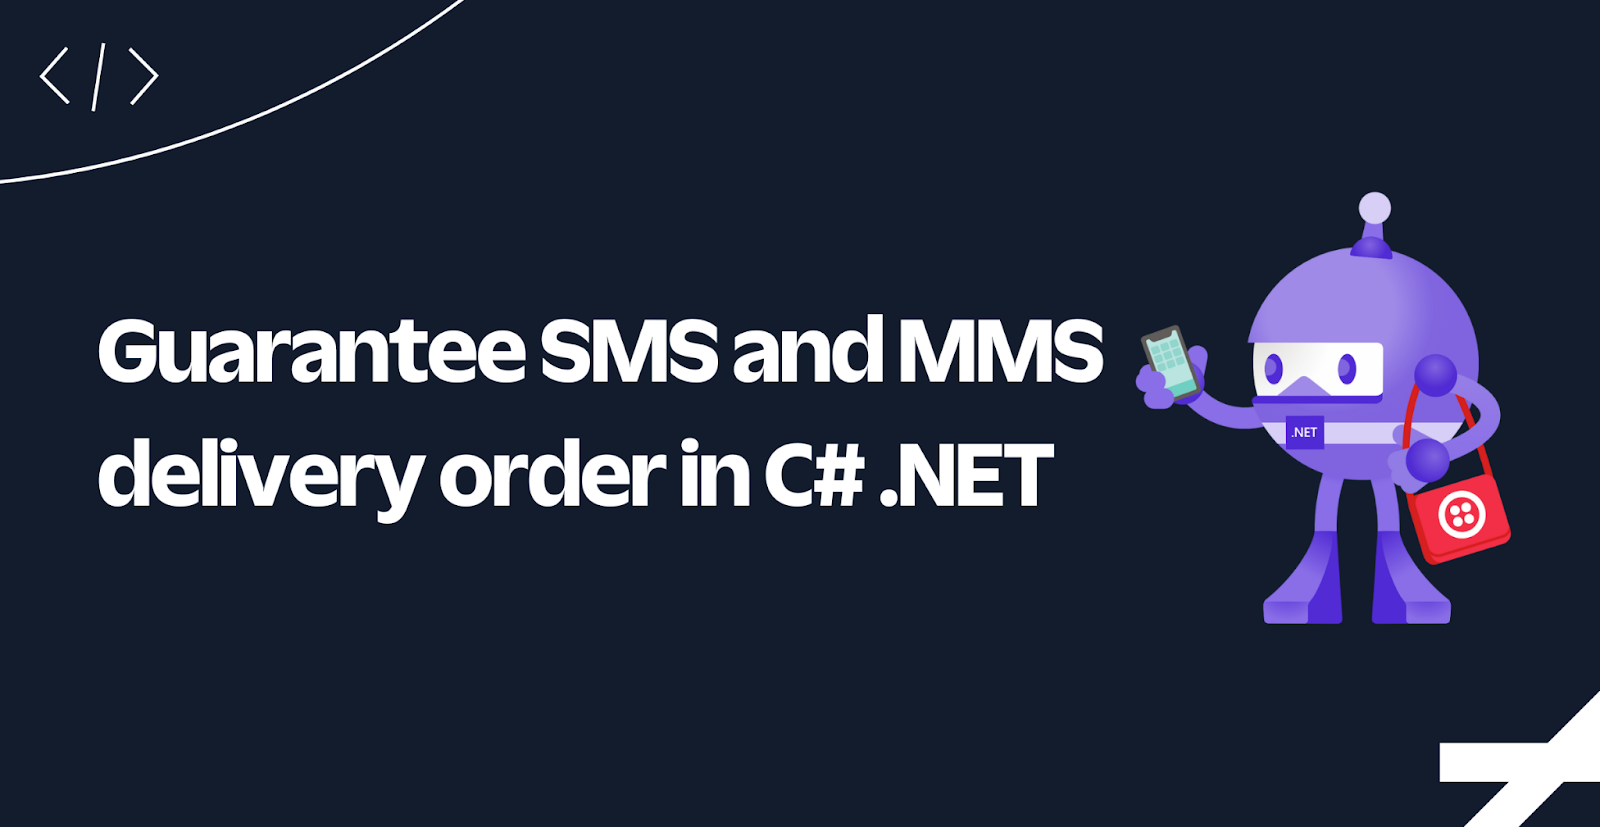 Guarantee SMS and MMS delivery order in C# .NET